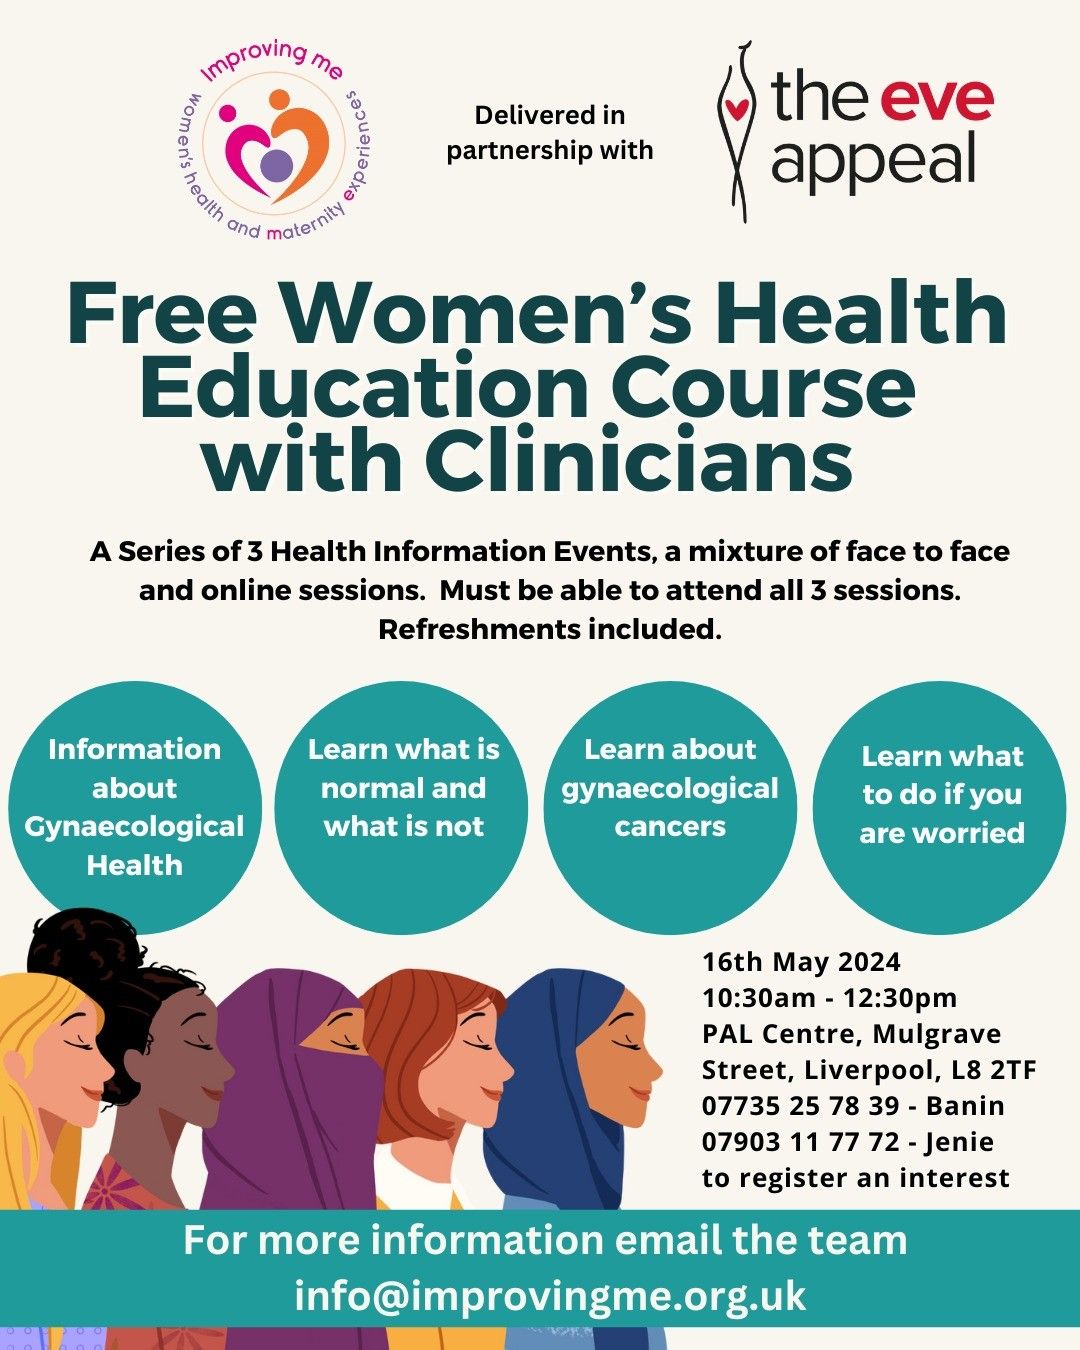 Women's Health Education Course with Clinicians - Free Event